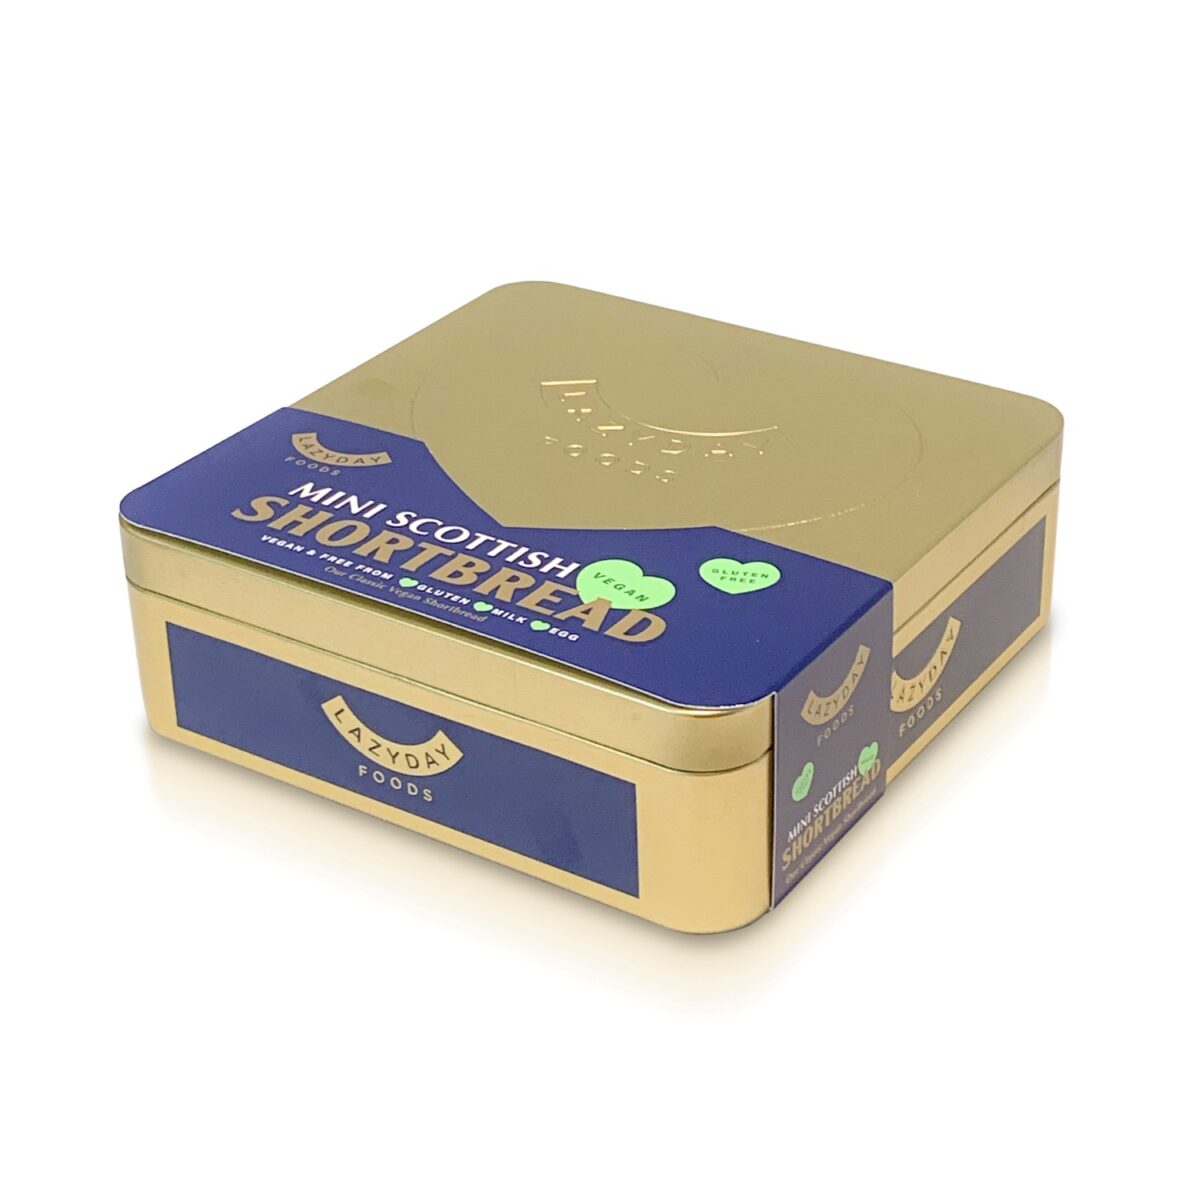 A vegan, dairy-free, and gluten-free shortbread tin from Lazy Day Foods